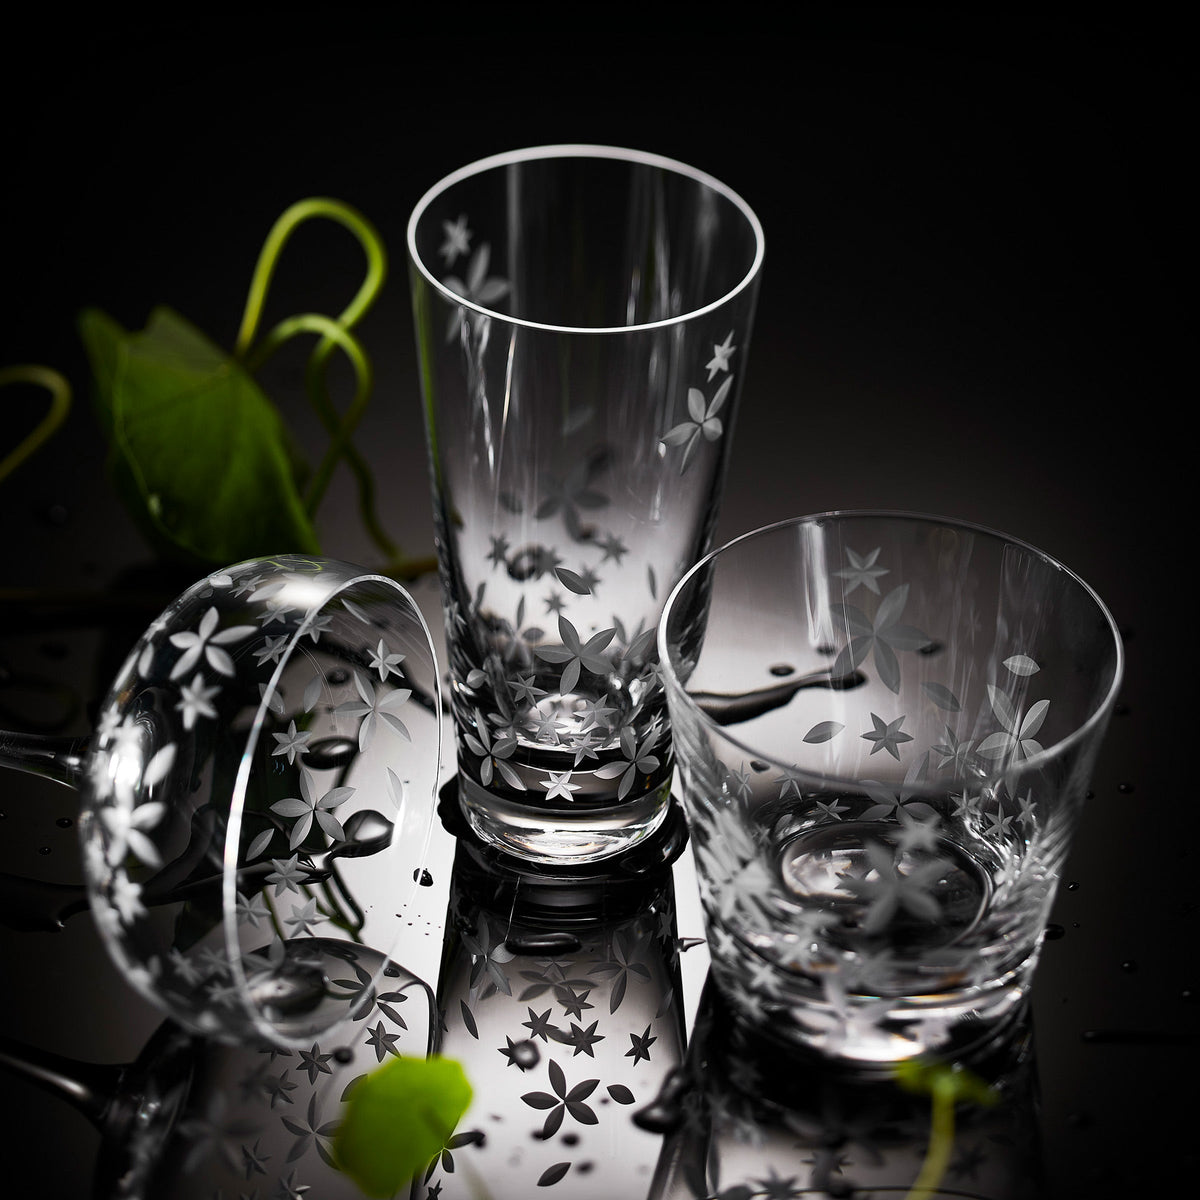 A set of Chatham Bloom Tumblers from the Caskata Collection featuring a floral pattern, made of lead-free crystal.